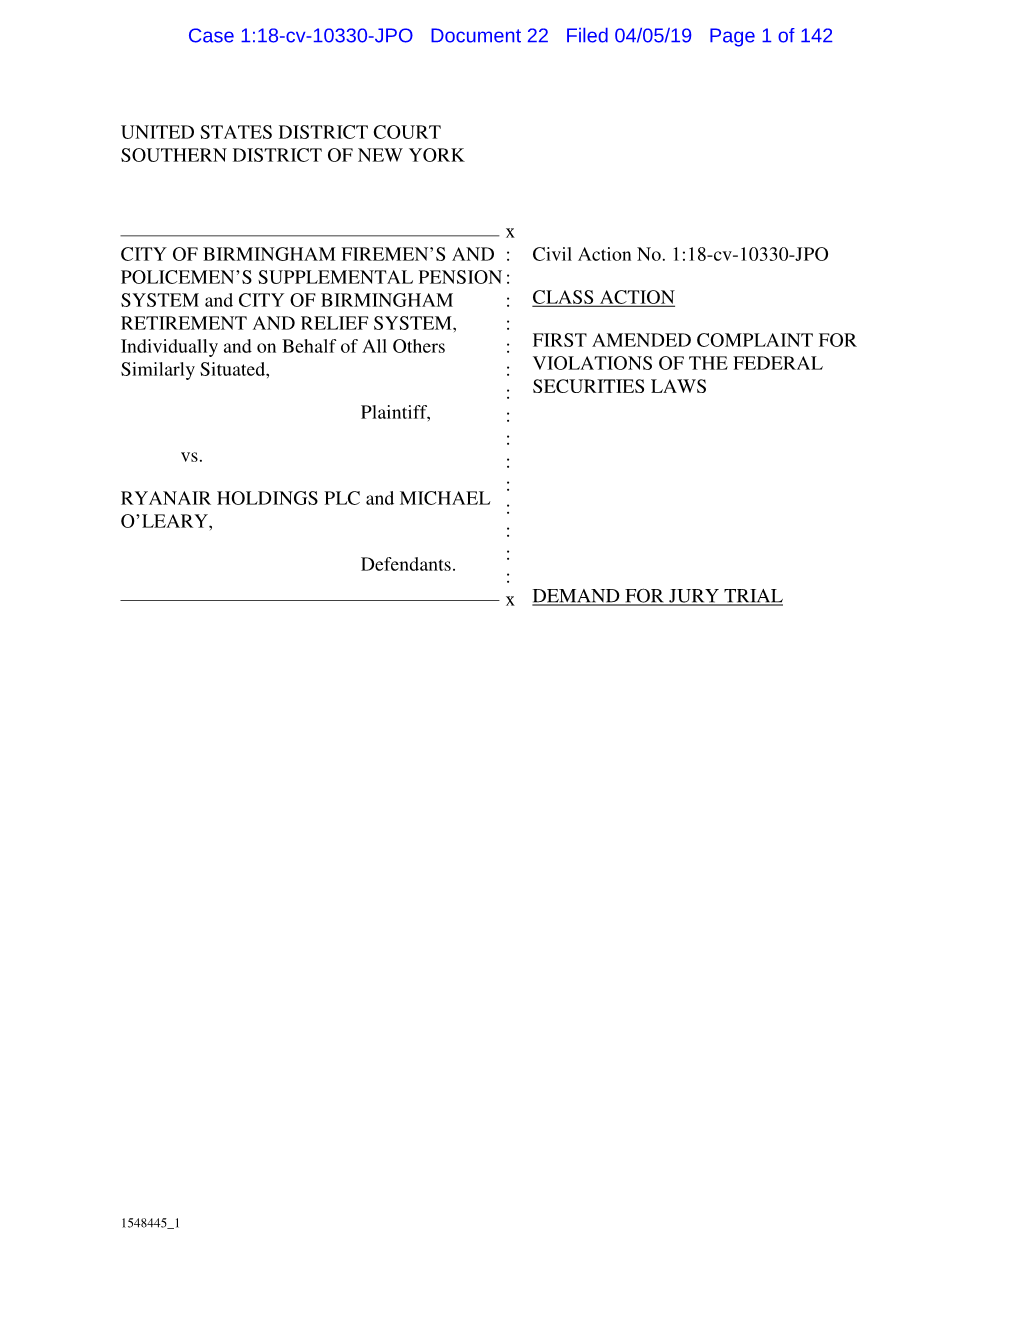 Case 1:18-Cv-10330-JPO Document 22 Filed 04/05/19 Page 1 of 142